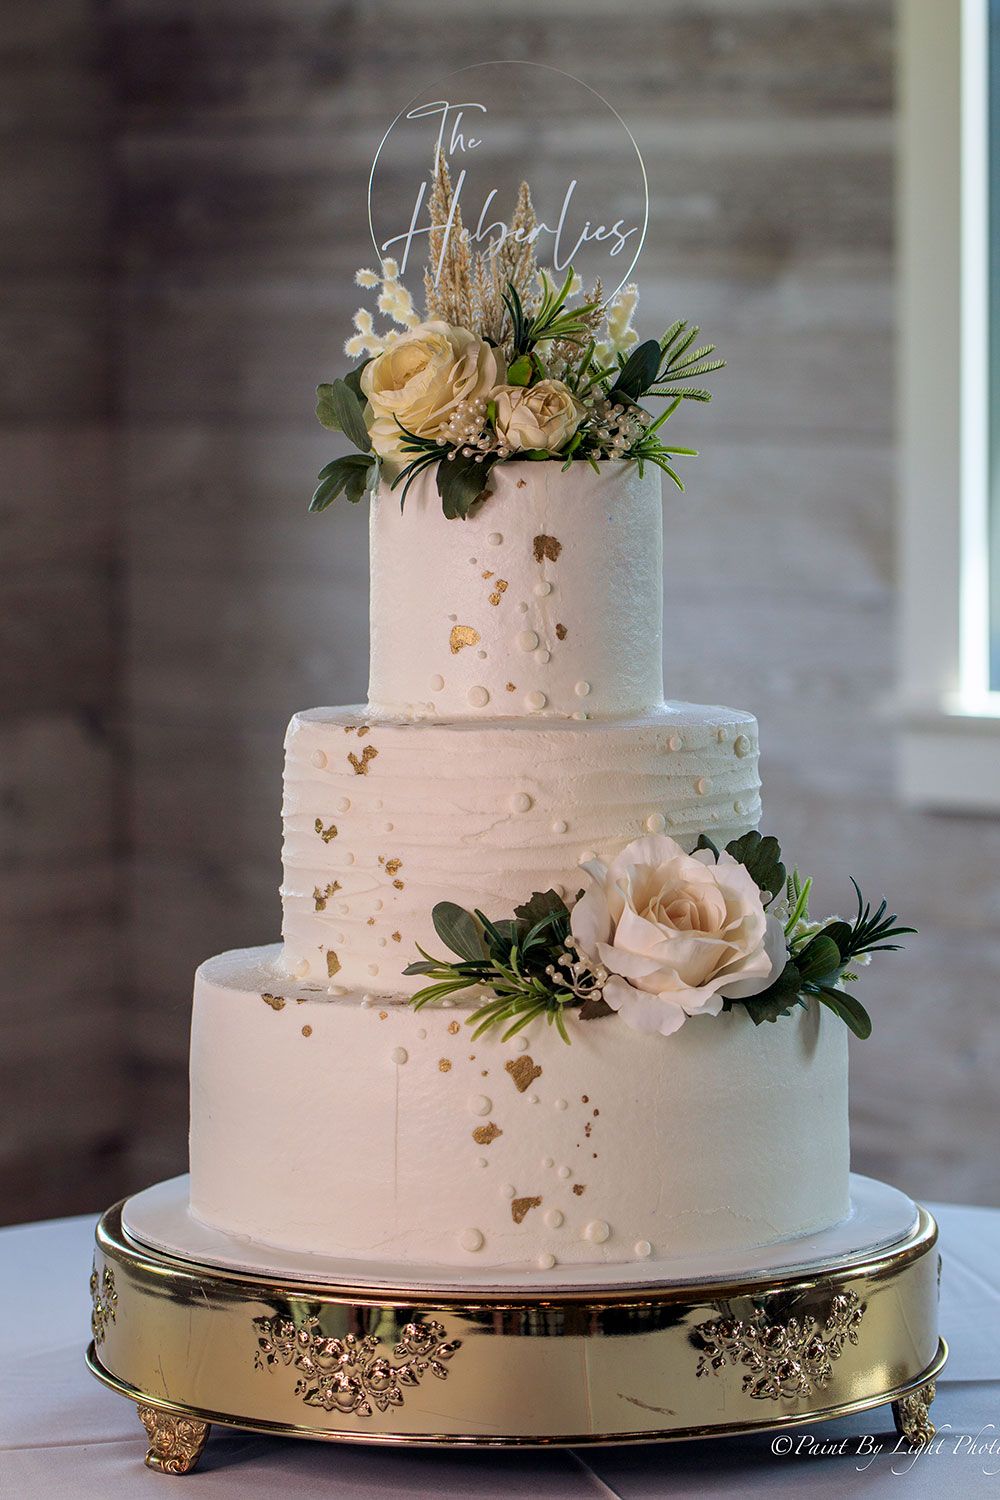 Elegant Buttercream Wedding Cake with Gold Foil Accents